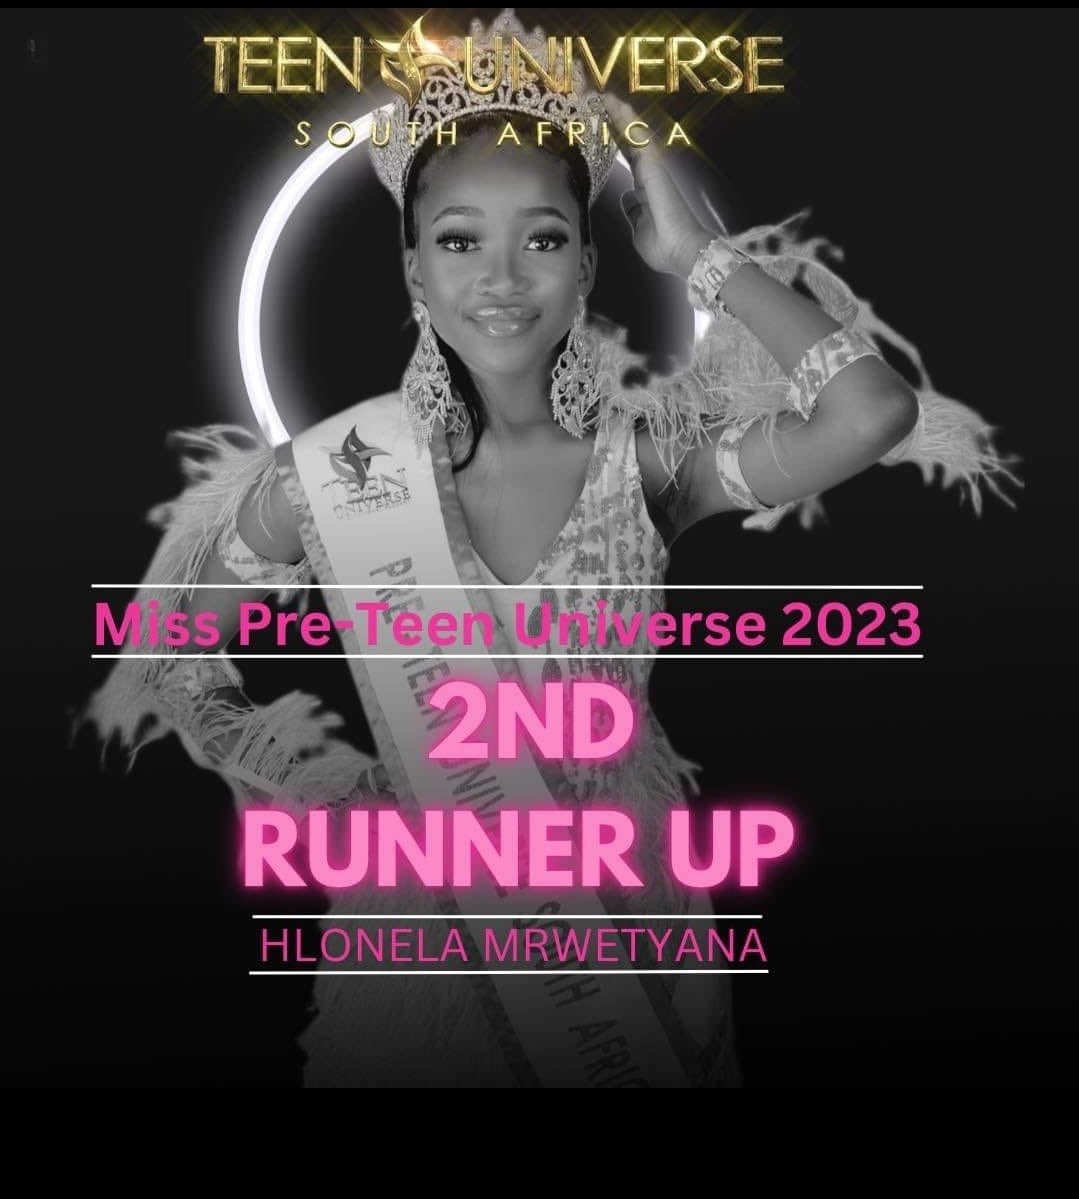 The UMF congratulates Hlonela Mrwetyana for being crowned the 2nd runner up for Miss Pre-teen Universe and winning the best interview award. You represented South Africa, we are looking forward to seeing you inspiring and impacting every young girl in the GBV space. 🎊 💃🏿💃🏿🌹💞